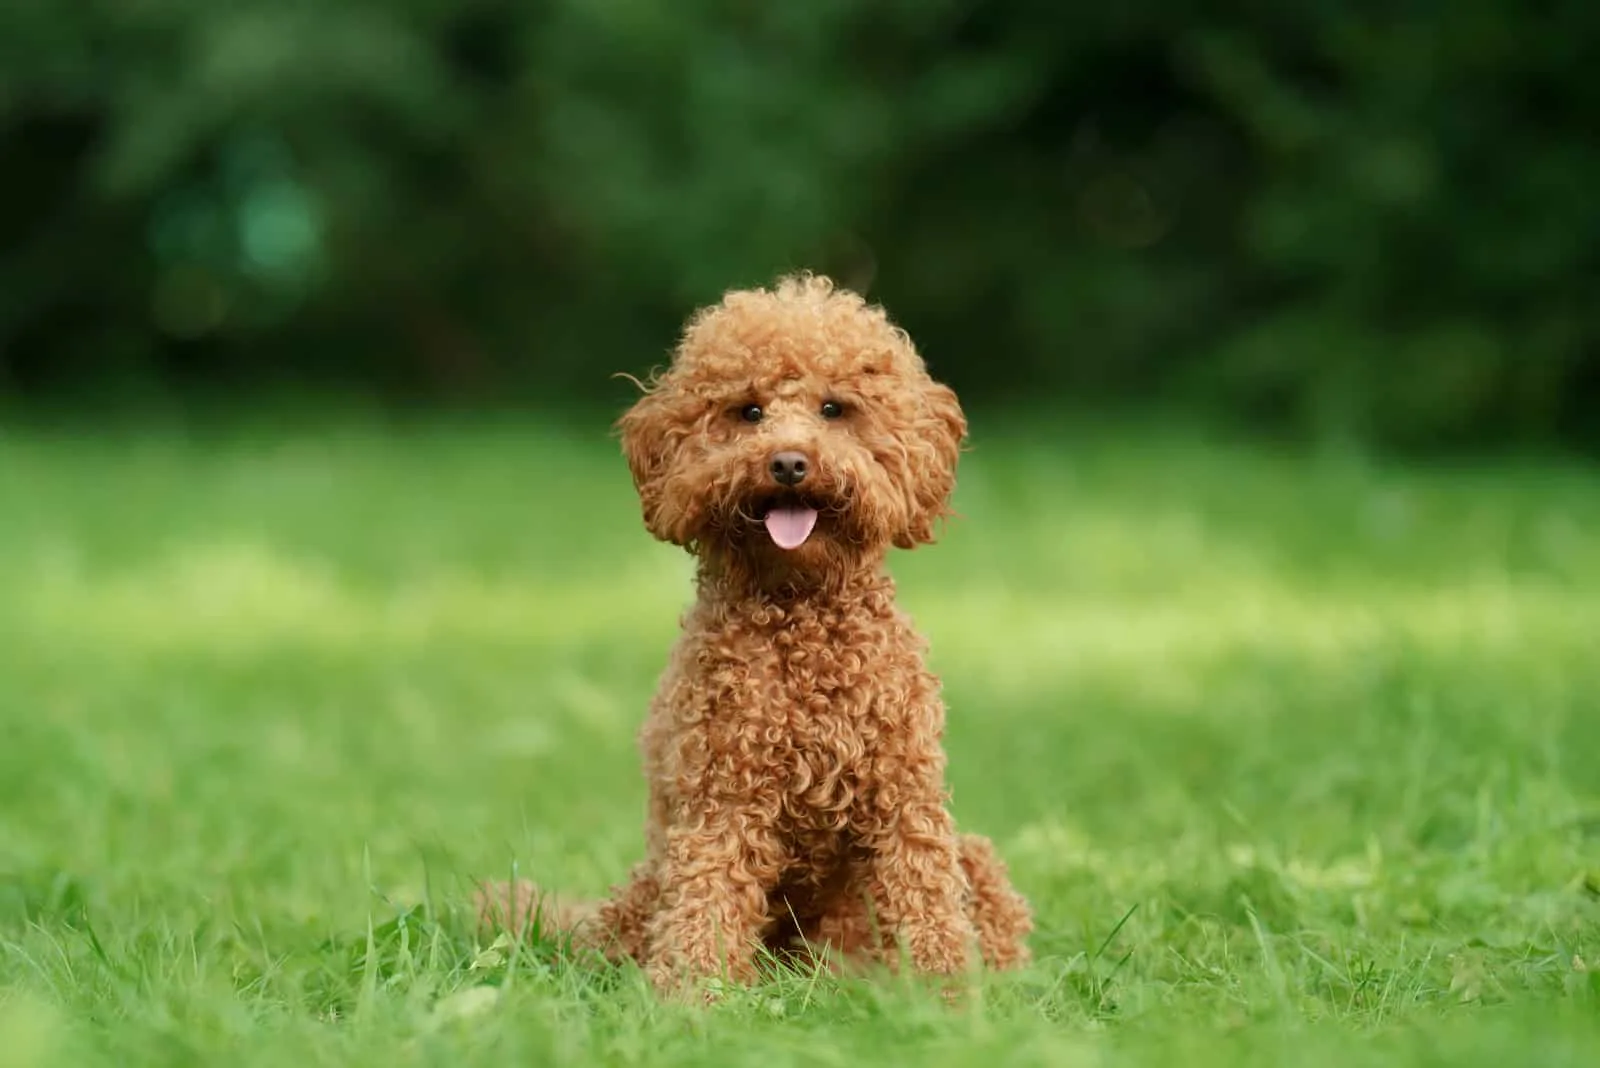 A poodle is sitting on the grass